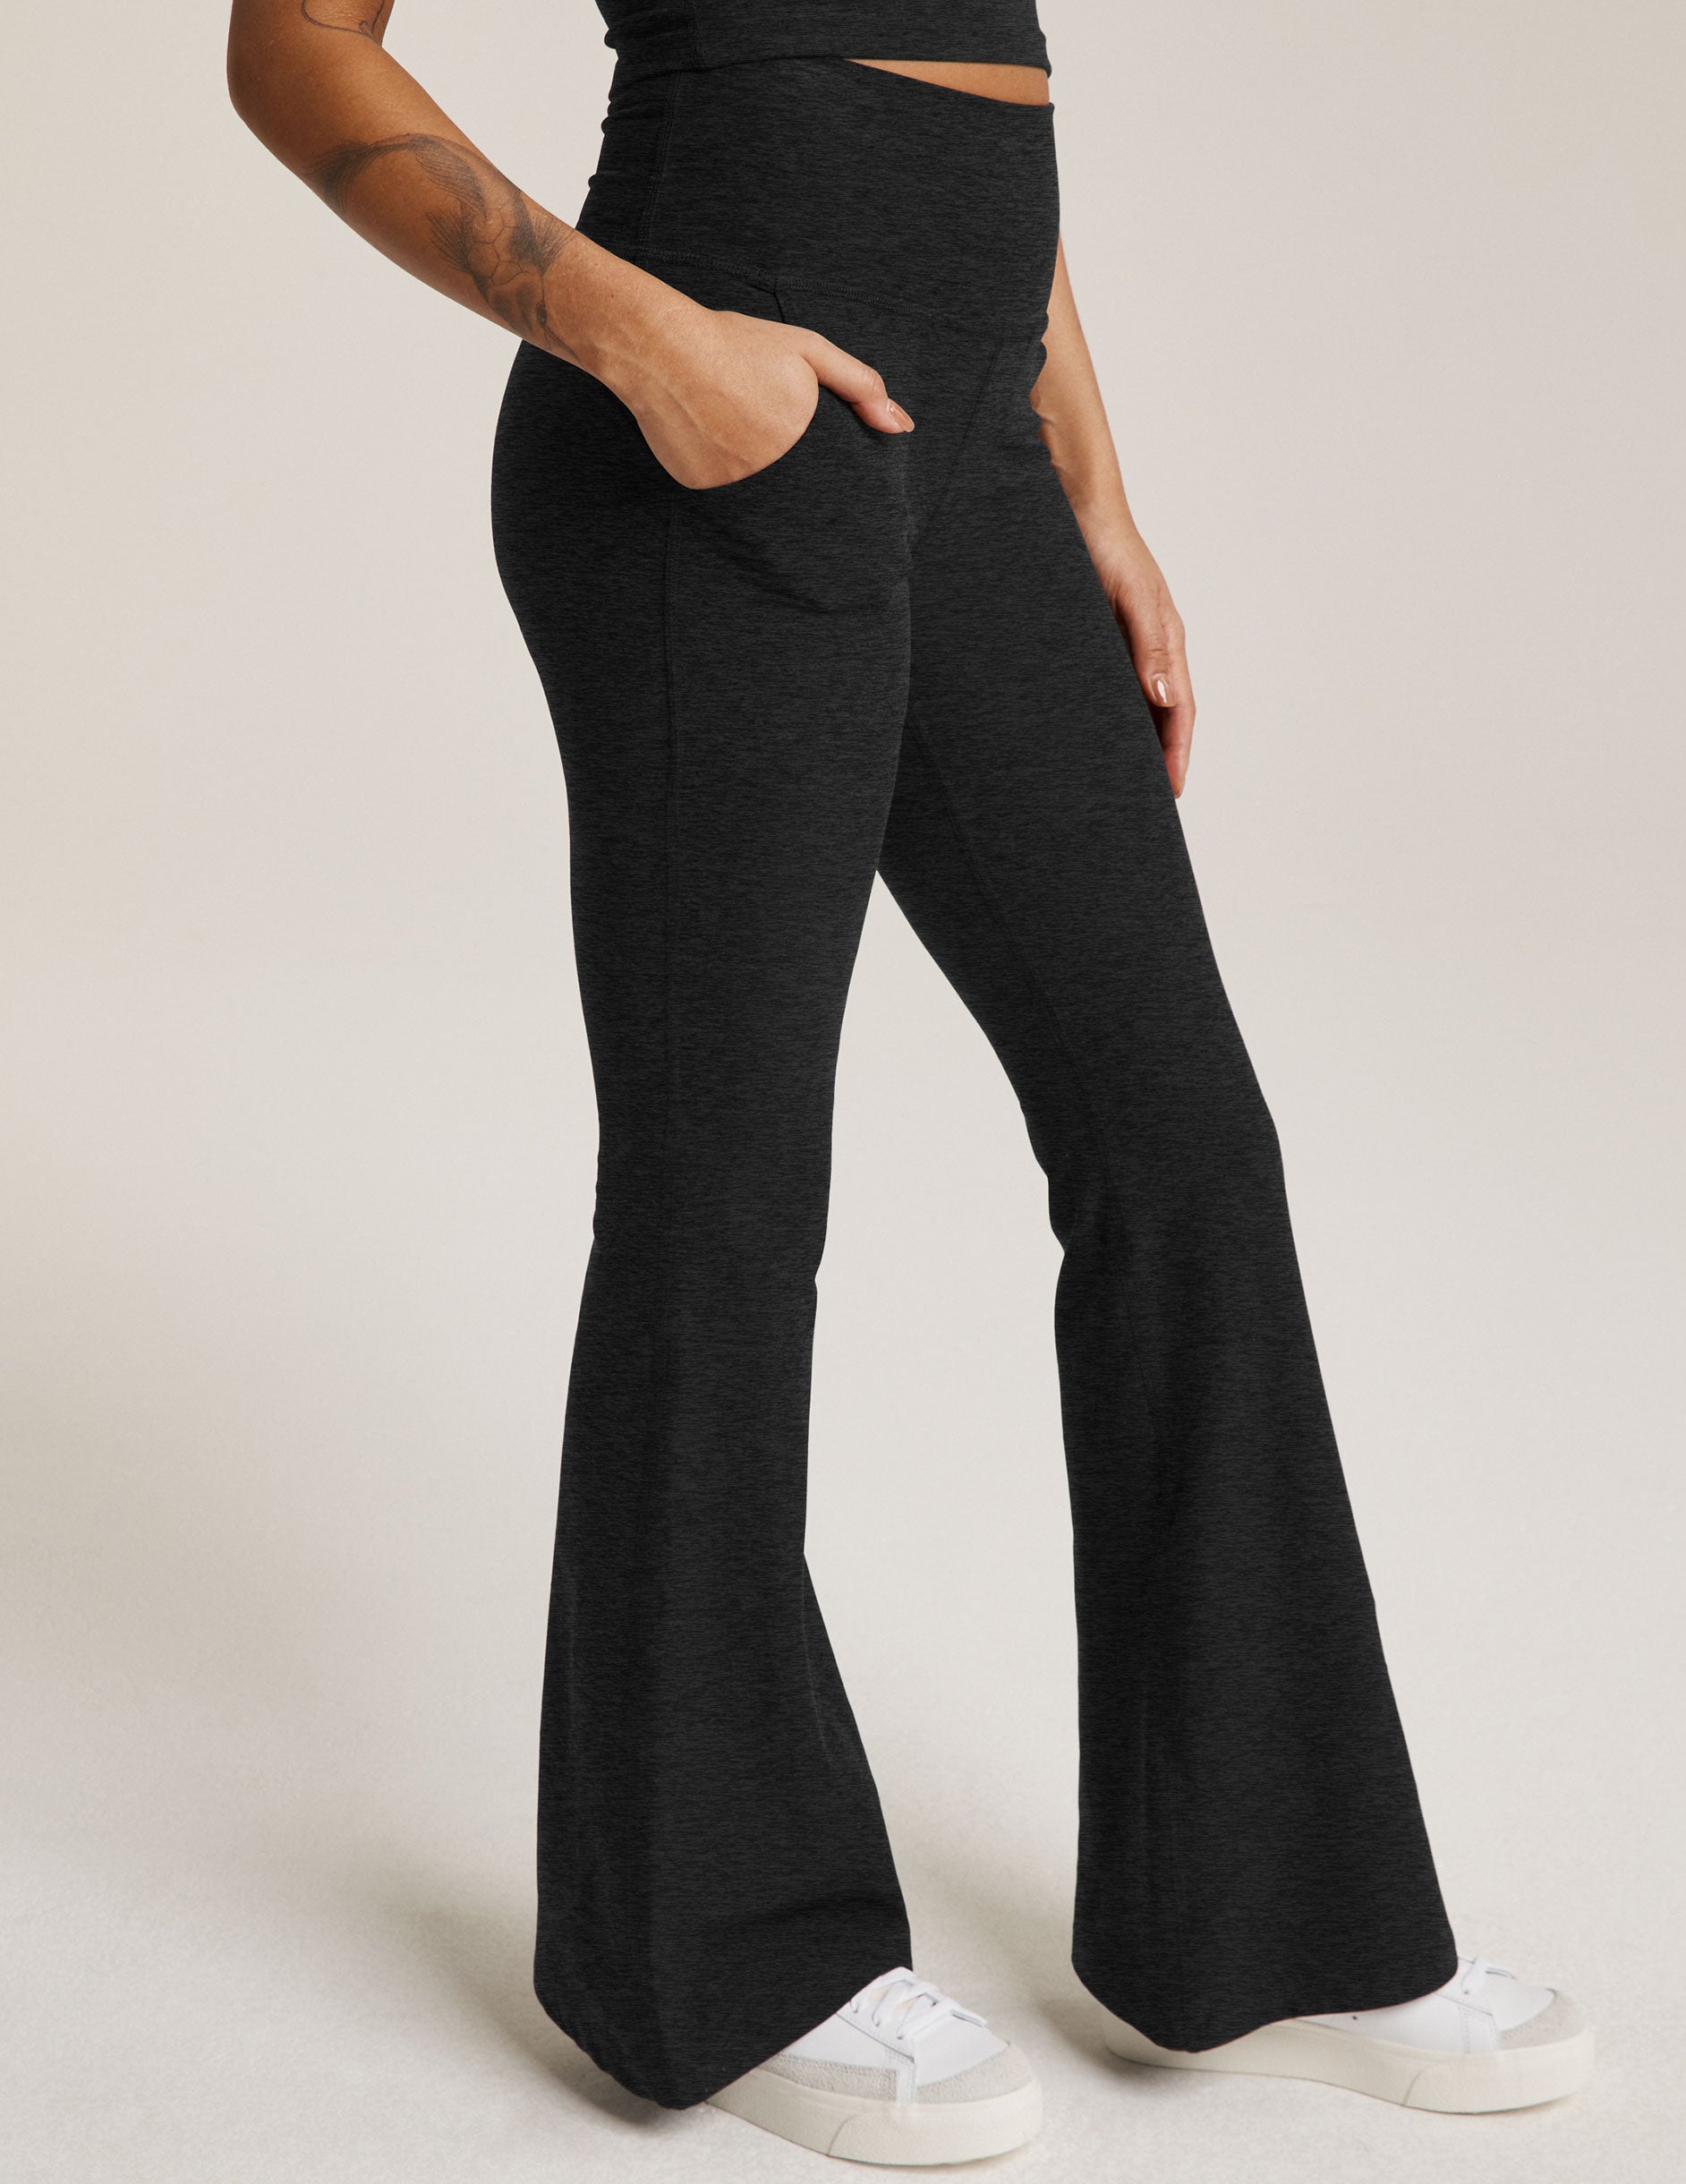 black flare pant with pocket detail